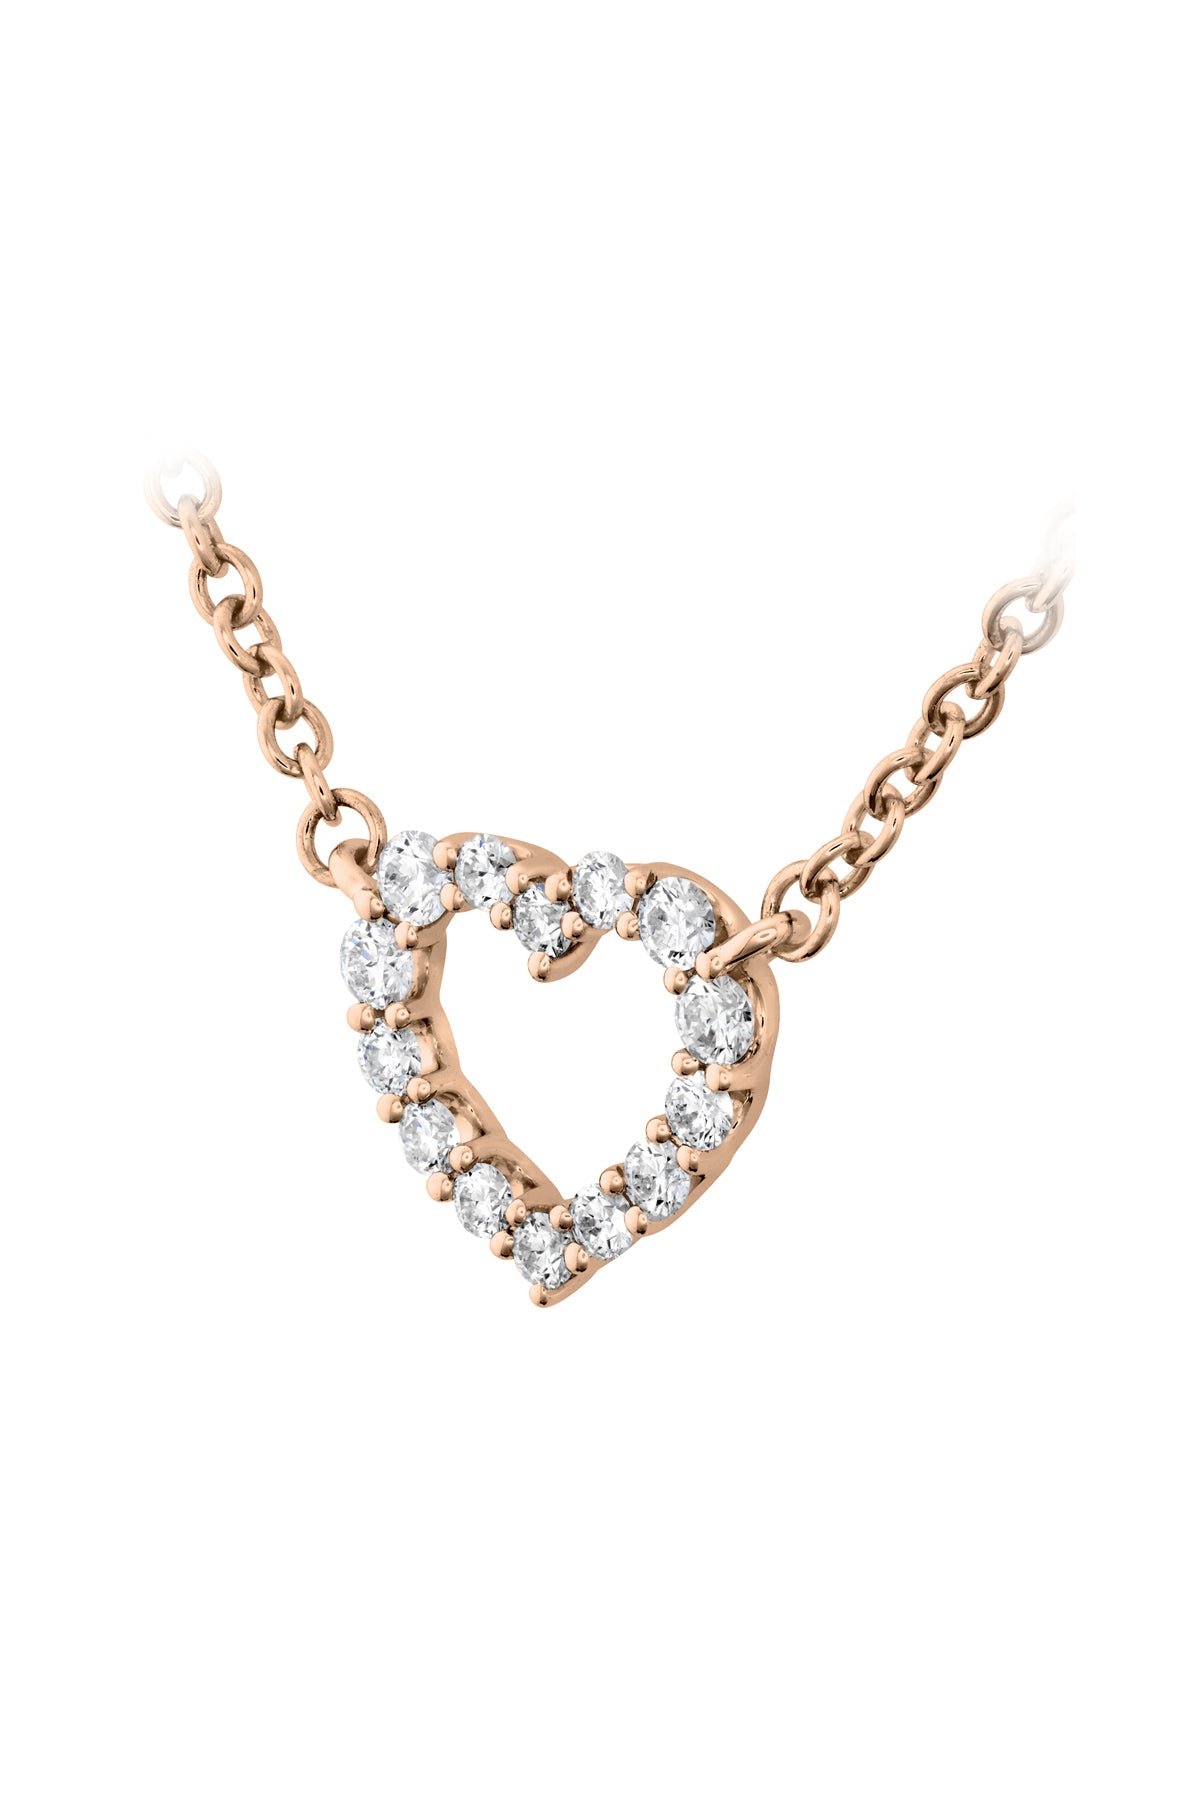 Small Signature Heart Pendant From Hearts On Fire available at LeGassick Diamonds and Jewellery Gold Coast, Australia.